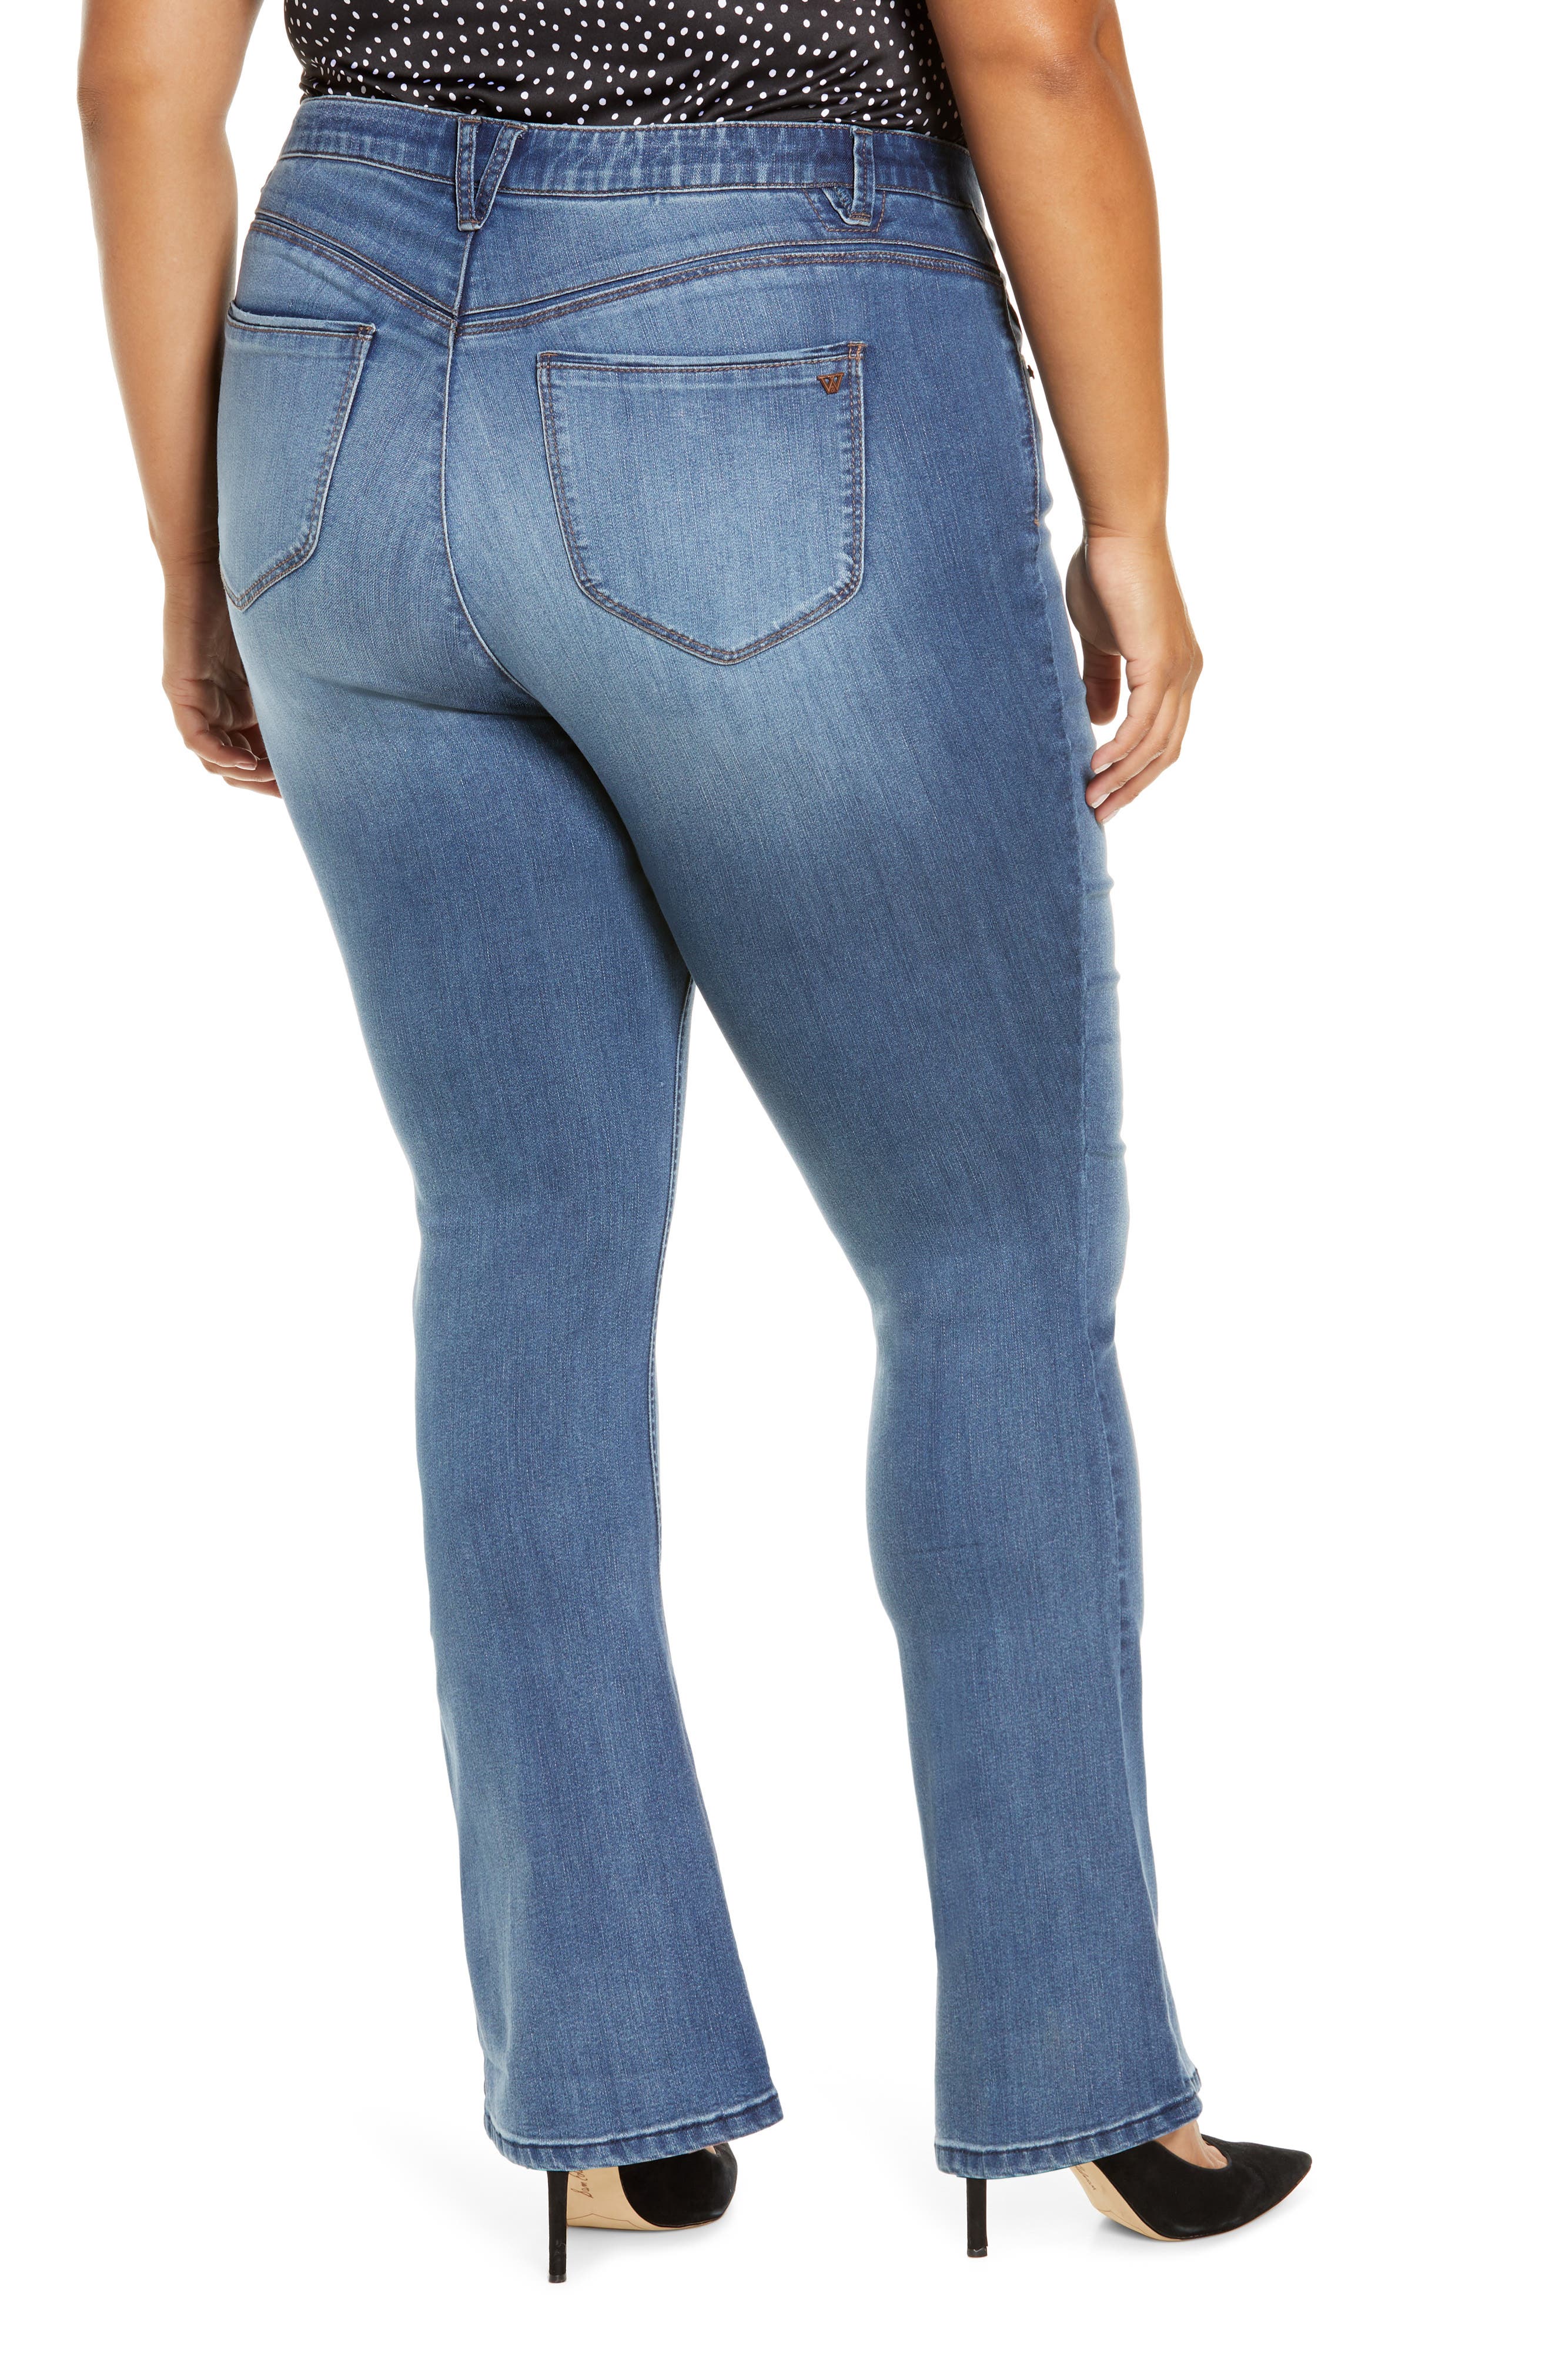 wit and wisdom high waisted jeans